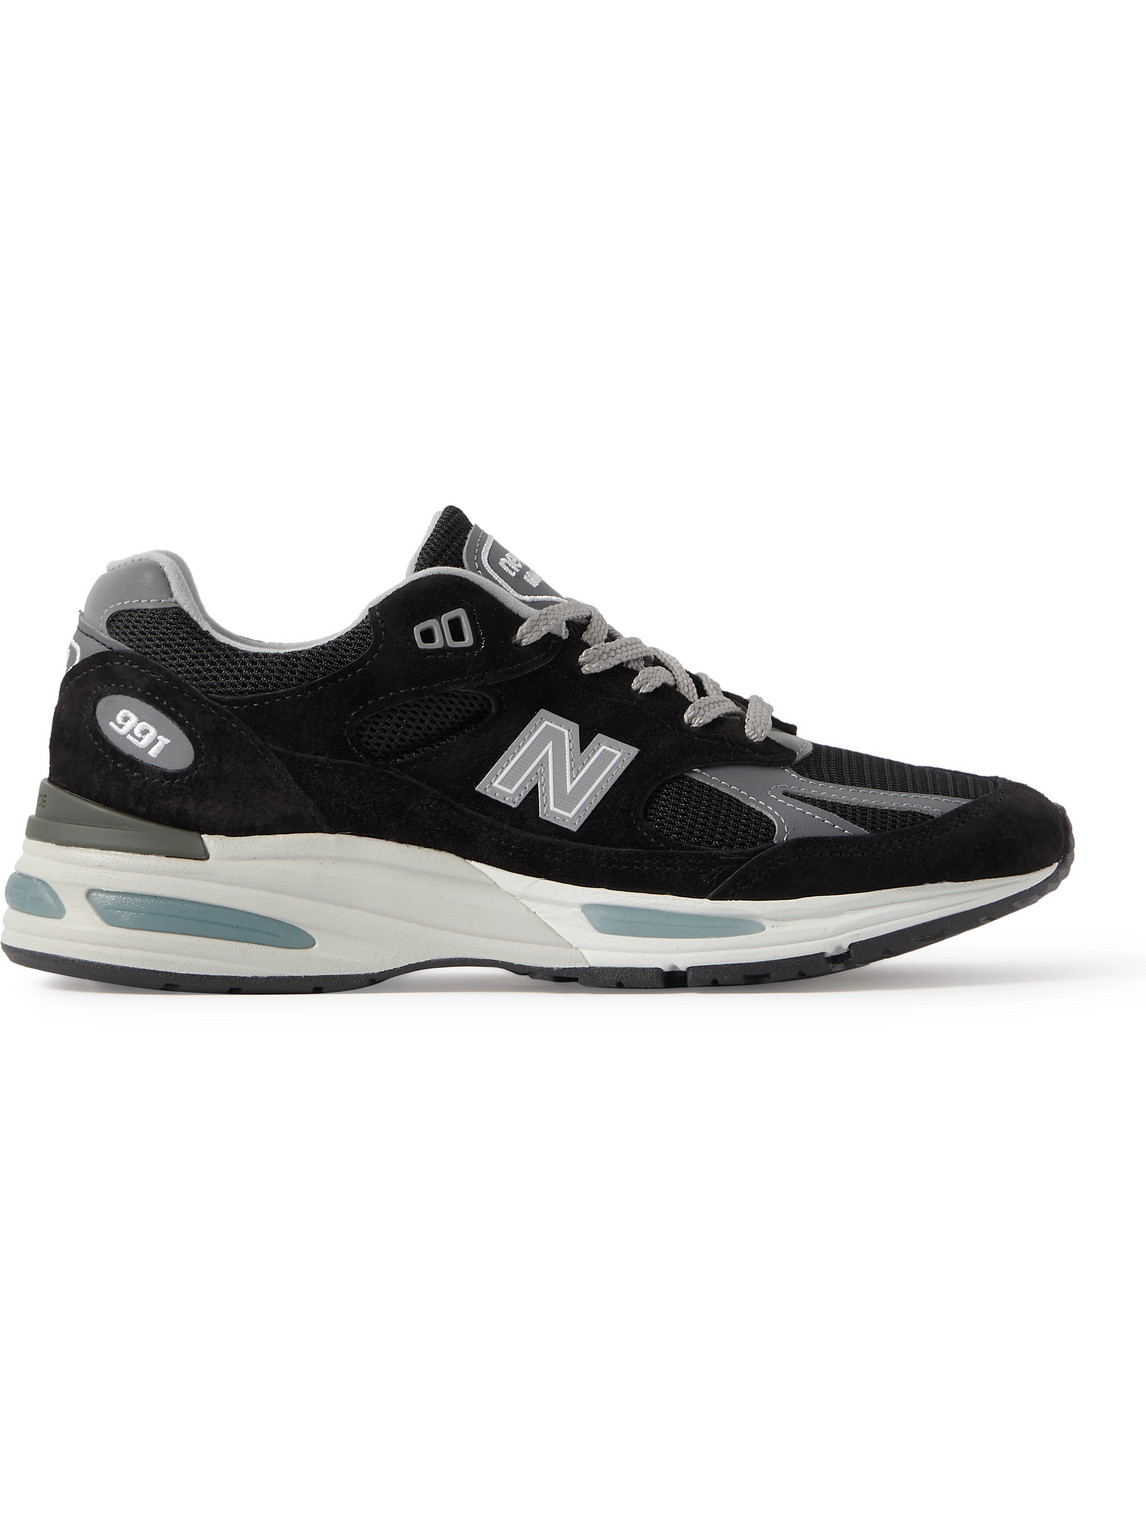 New Balance 991v2 Suede, Mesh And Faux Leather Trainers In Black